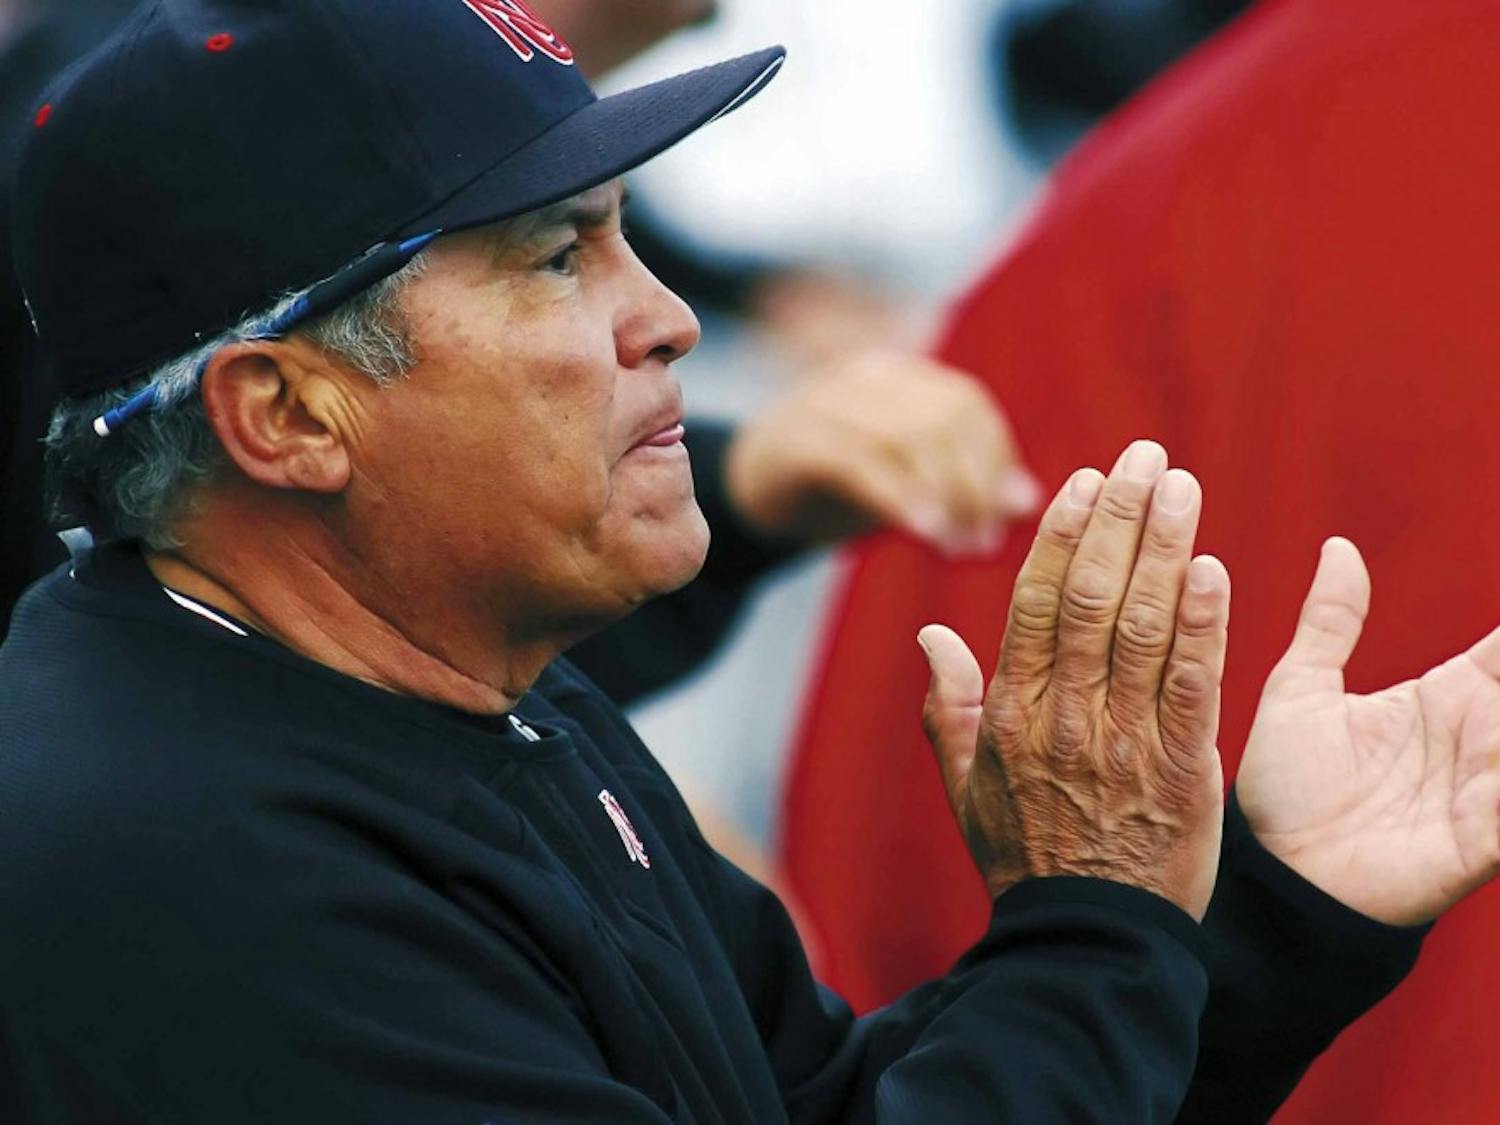 UNM baseball coach Rich Alday reached his 500th career win Friday in an 11-5 victory over San Diego State on Friday.